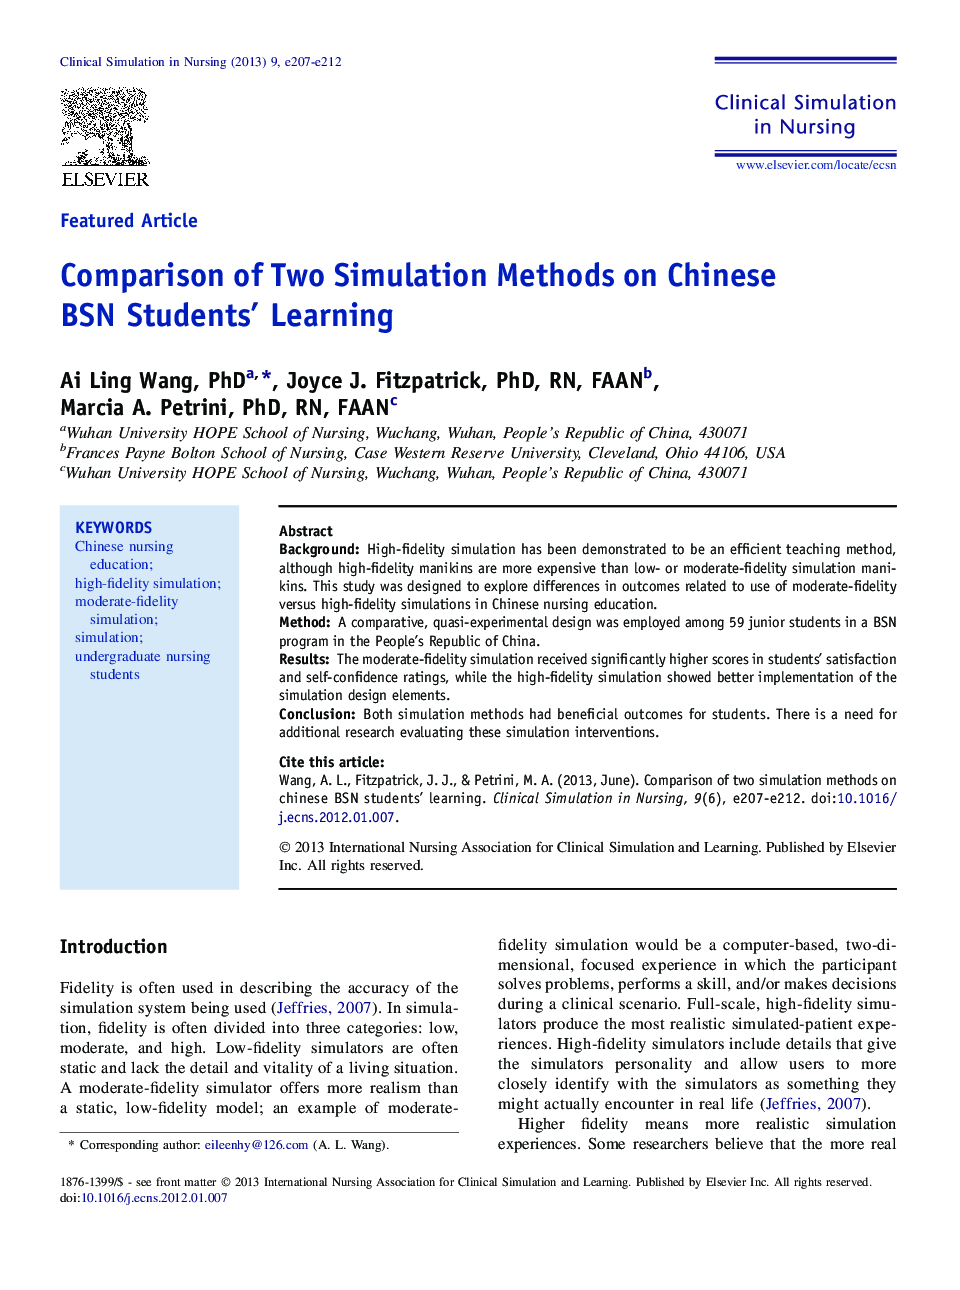 Comparison of Two Simulation Methods on Chinese BSN Students’ Learning